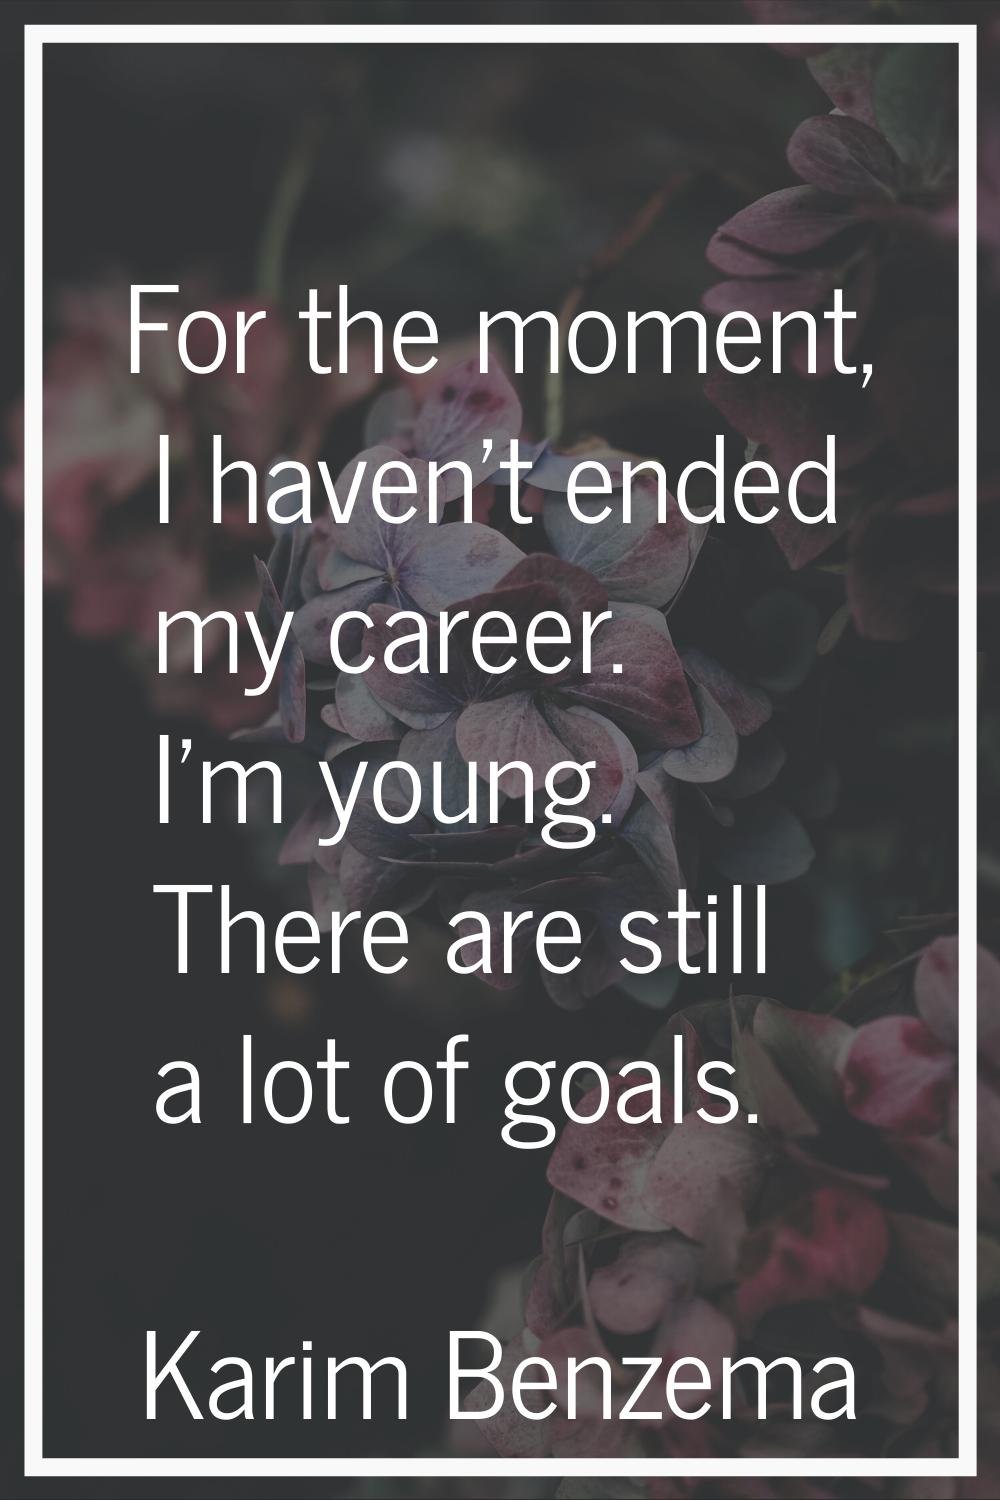 For the moment, I haven't ended my career. I'm young. There are still a lot of goals.